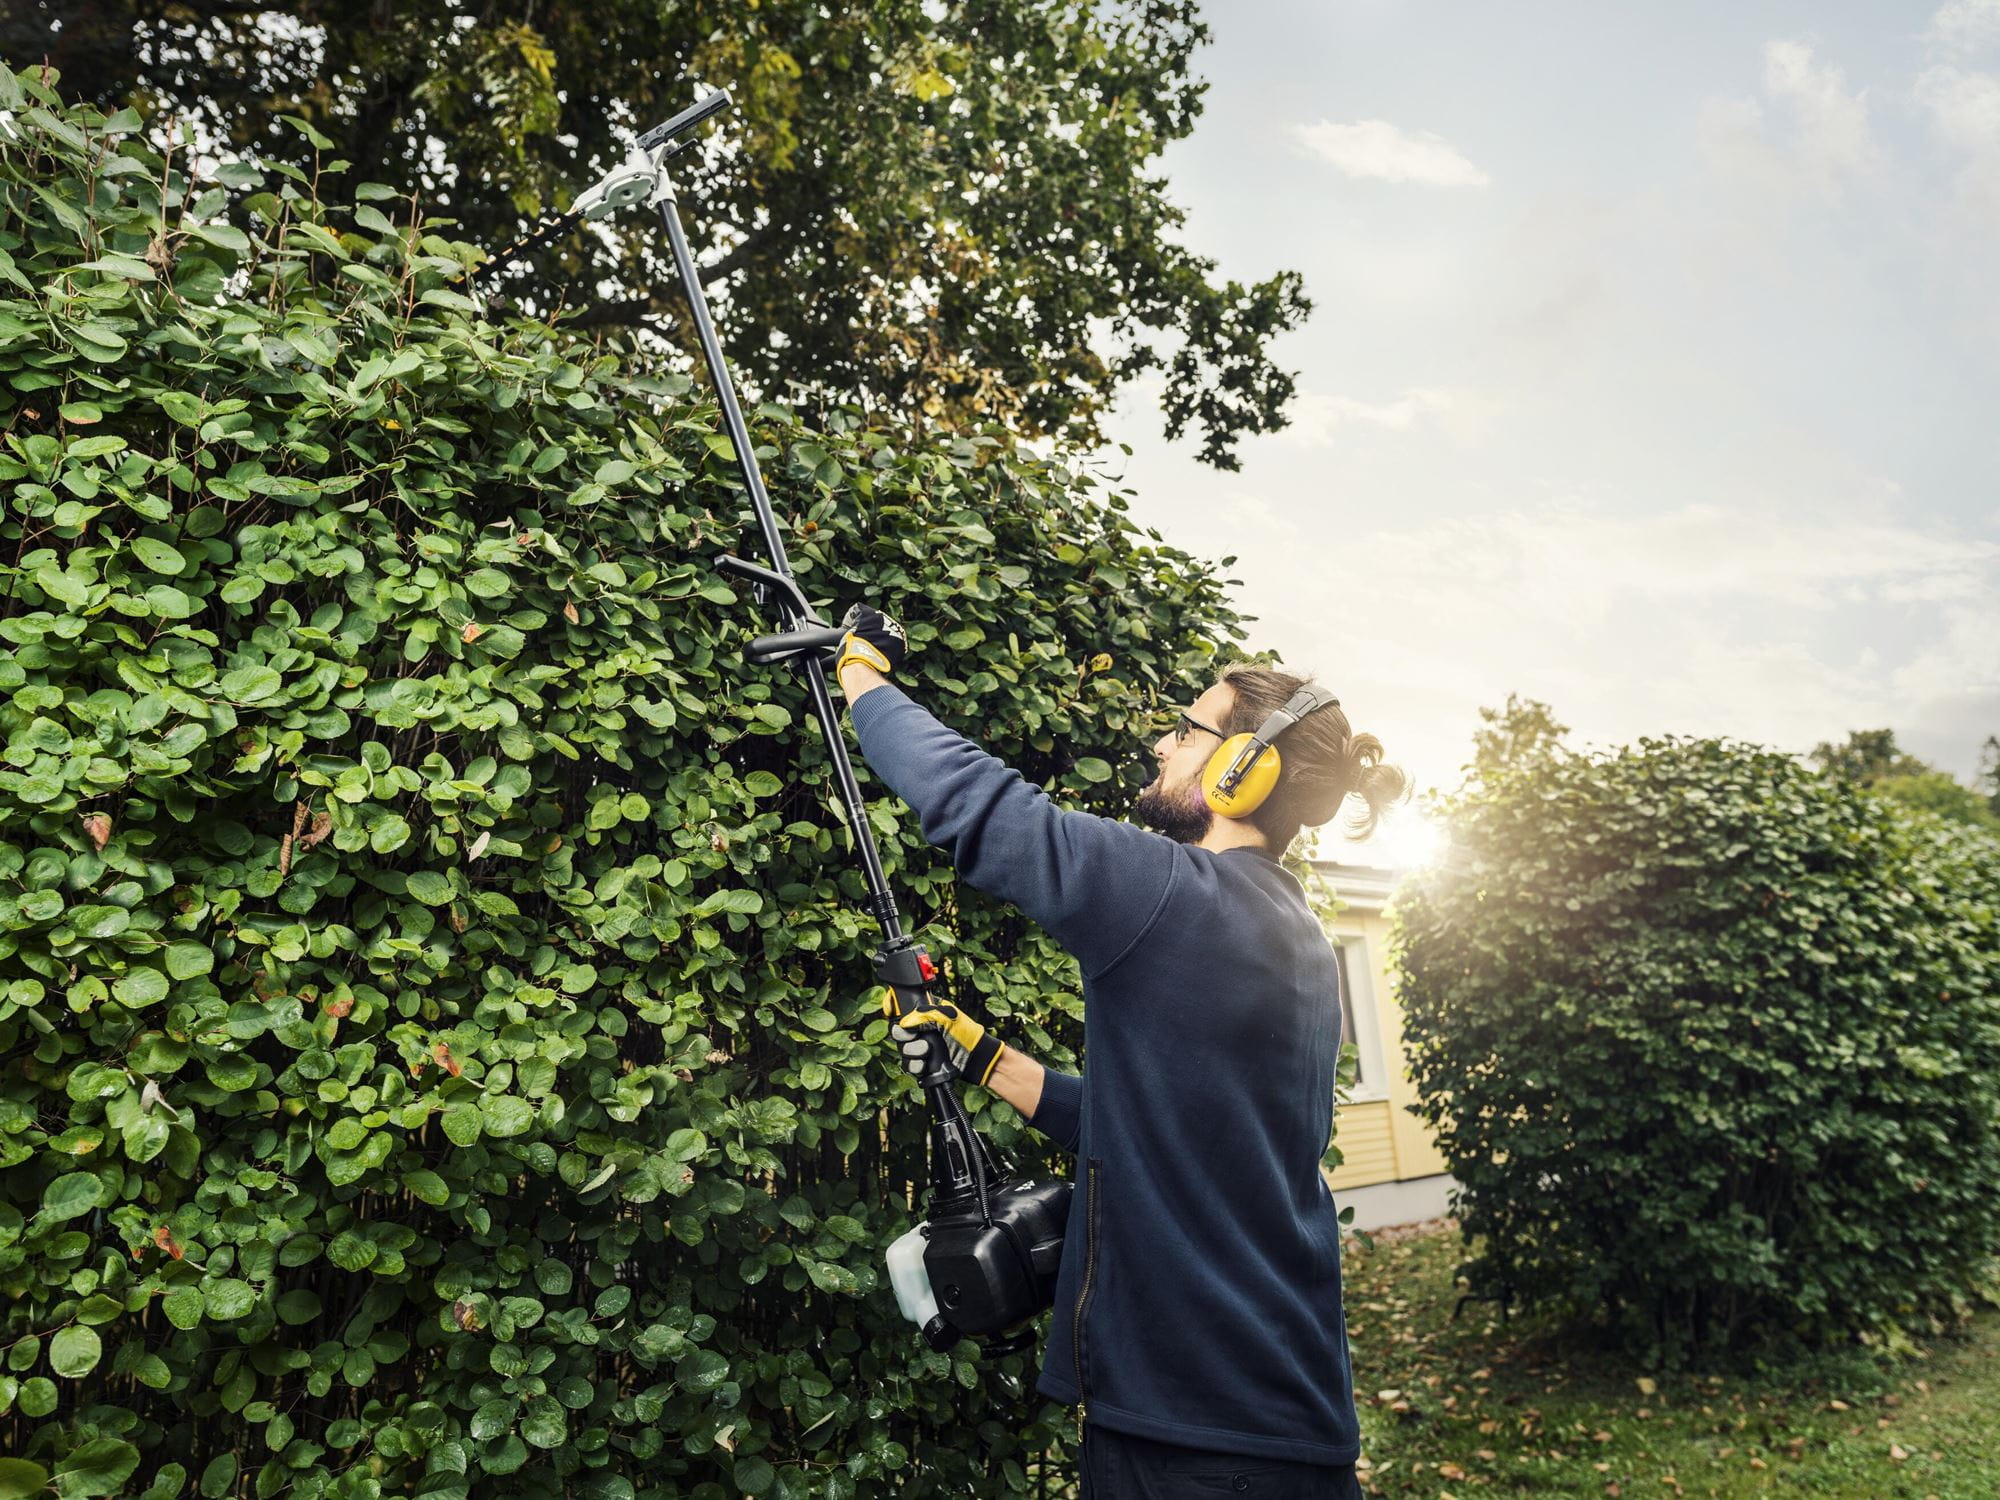 B 33PS + 4in1 - Hedge trimmer attachment